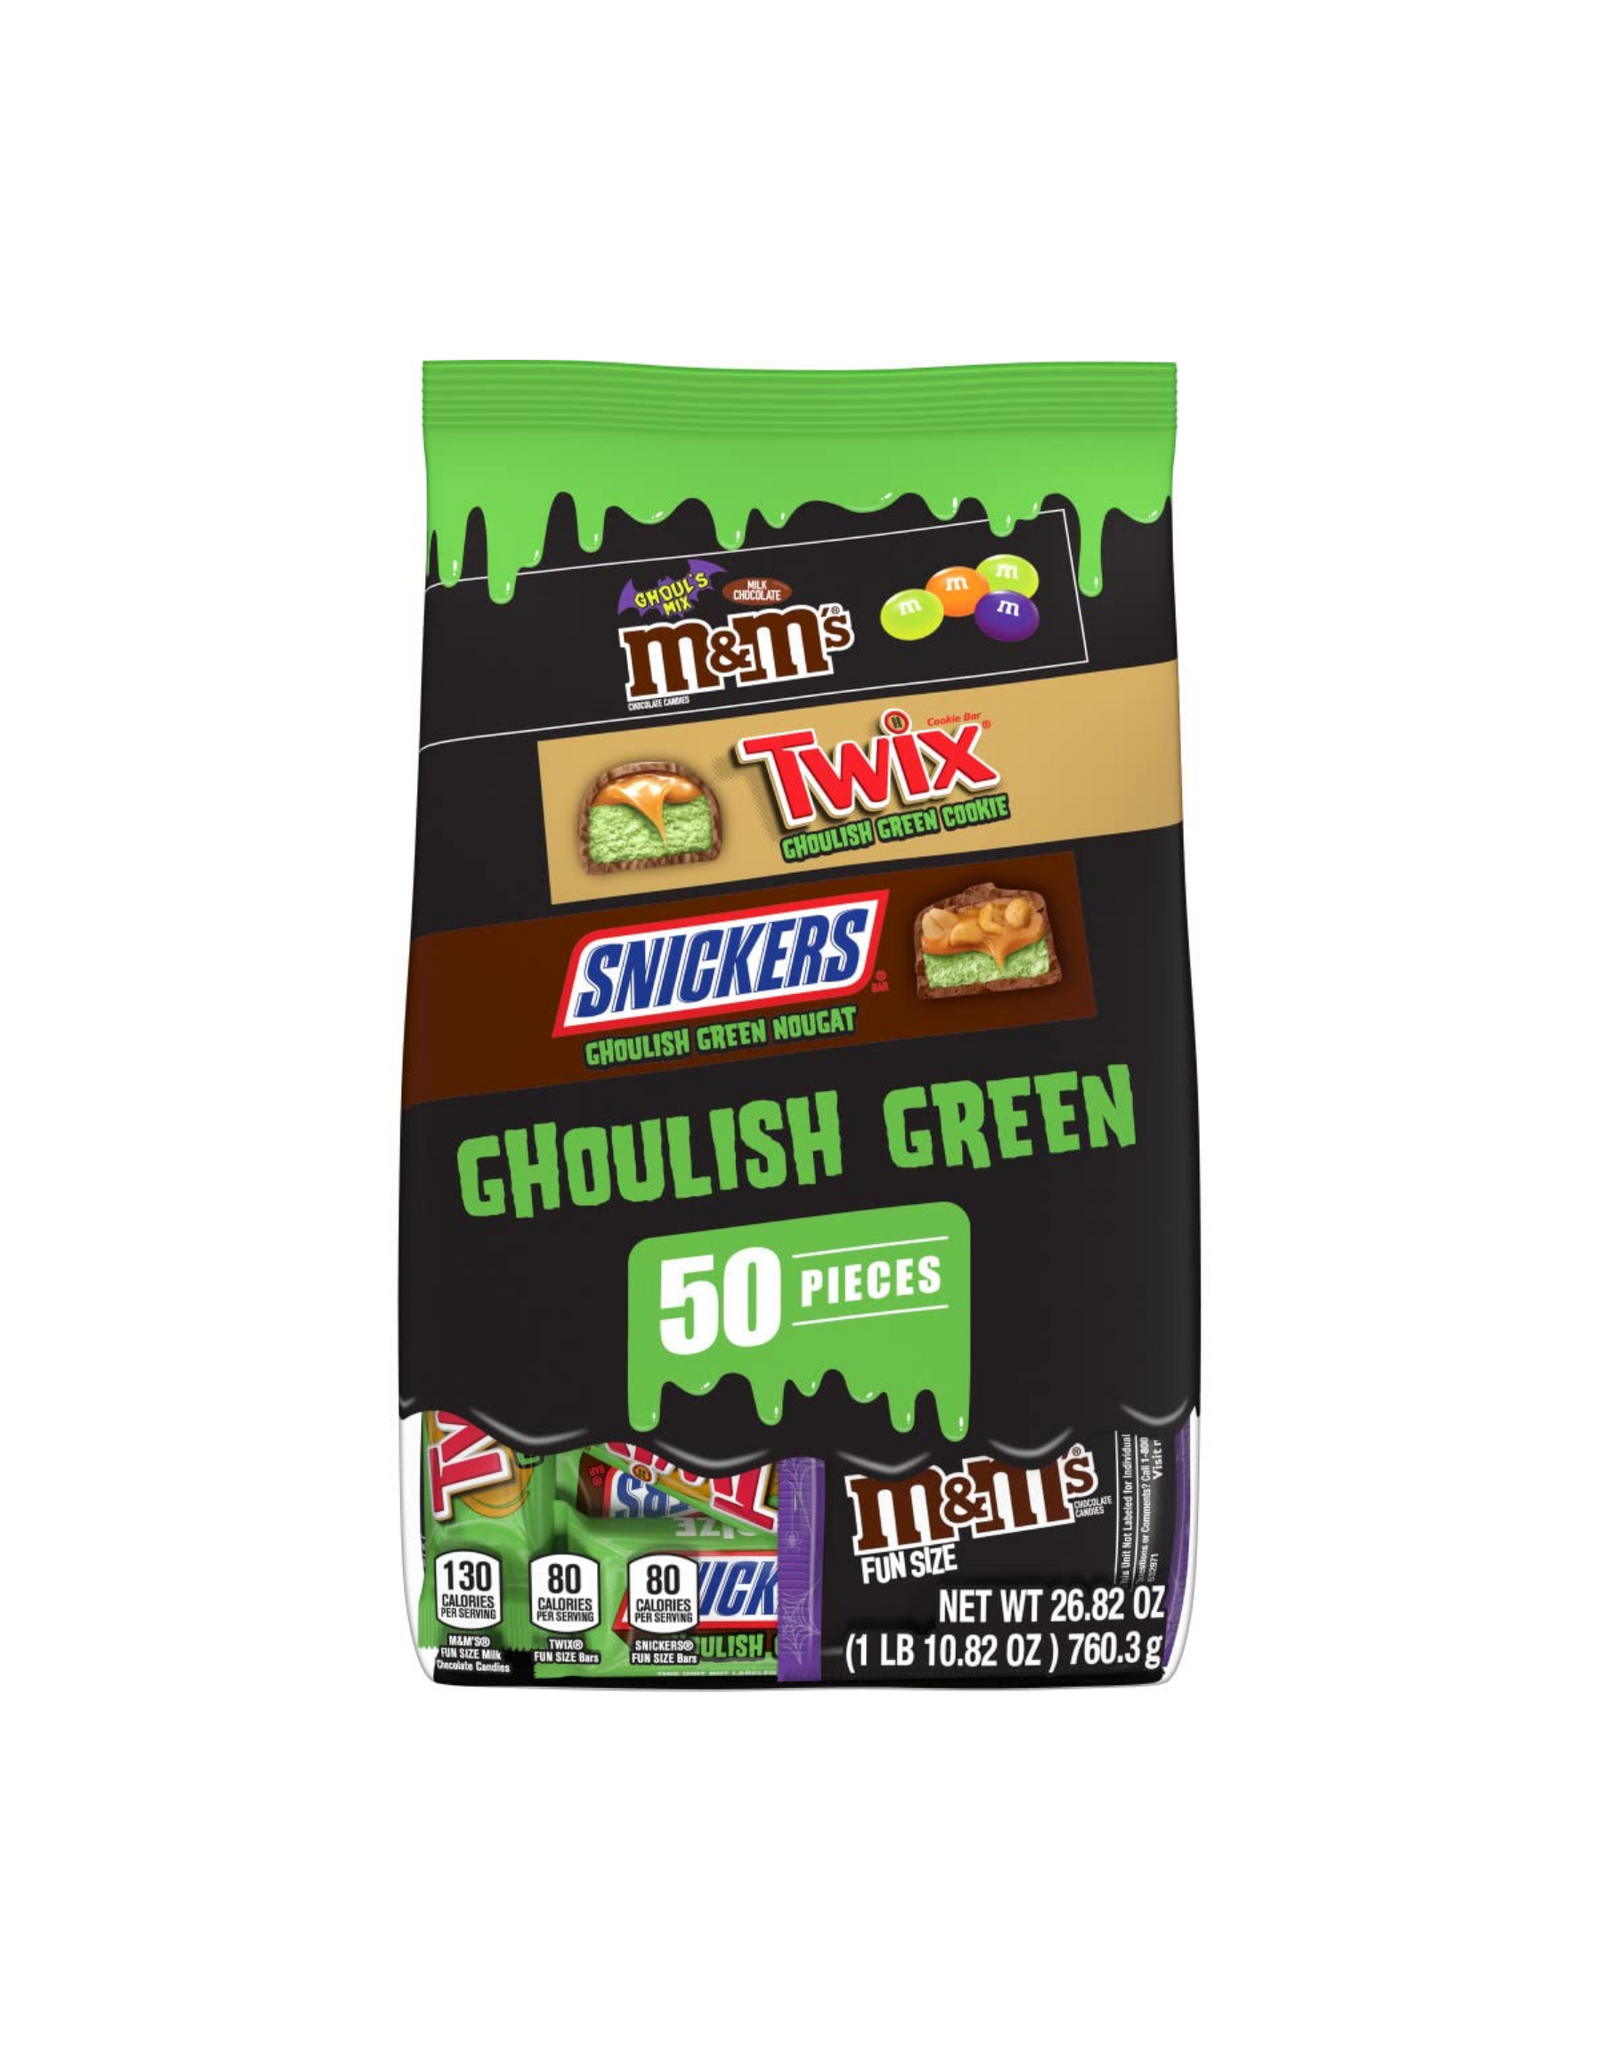 M&M'S & Snickers & Twix Fun Size Variety Pack Chocolate Candy Bars